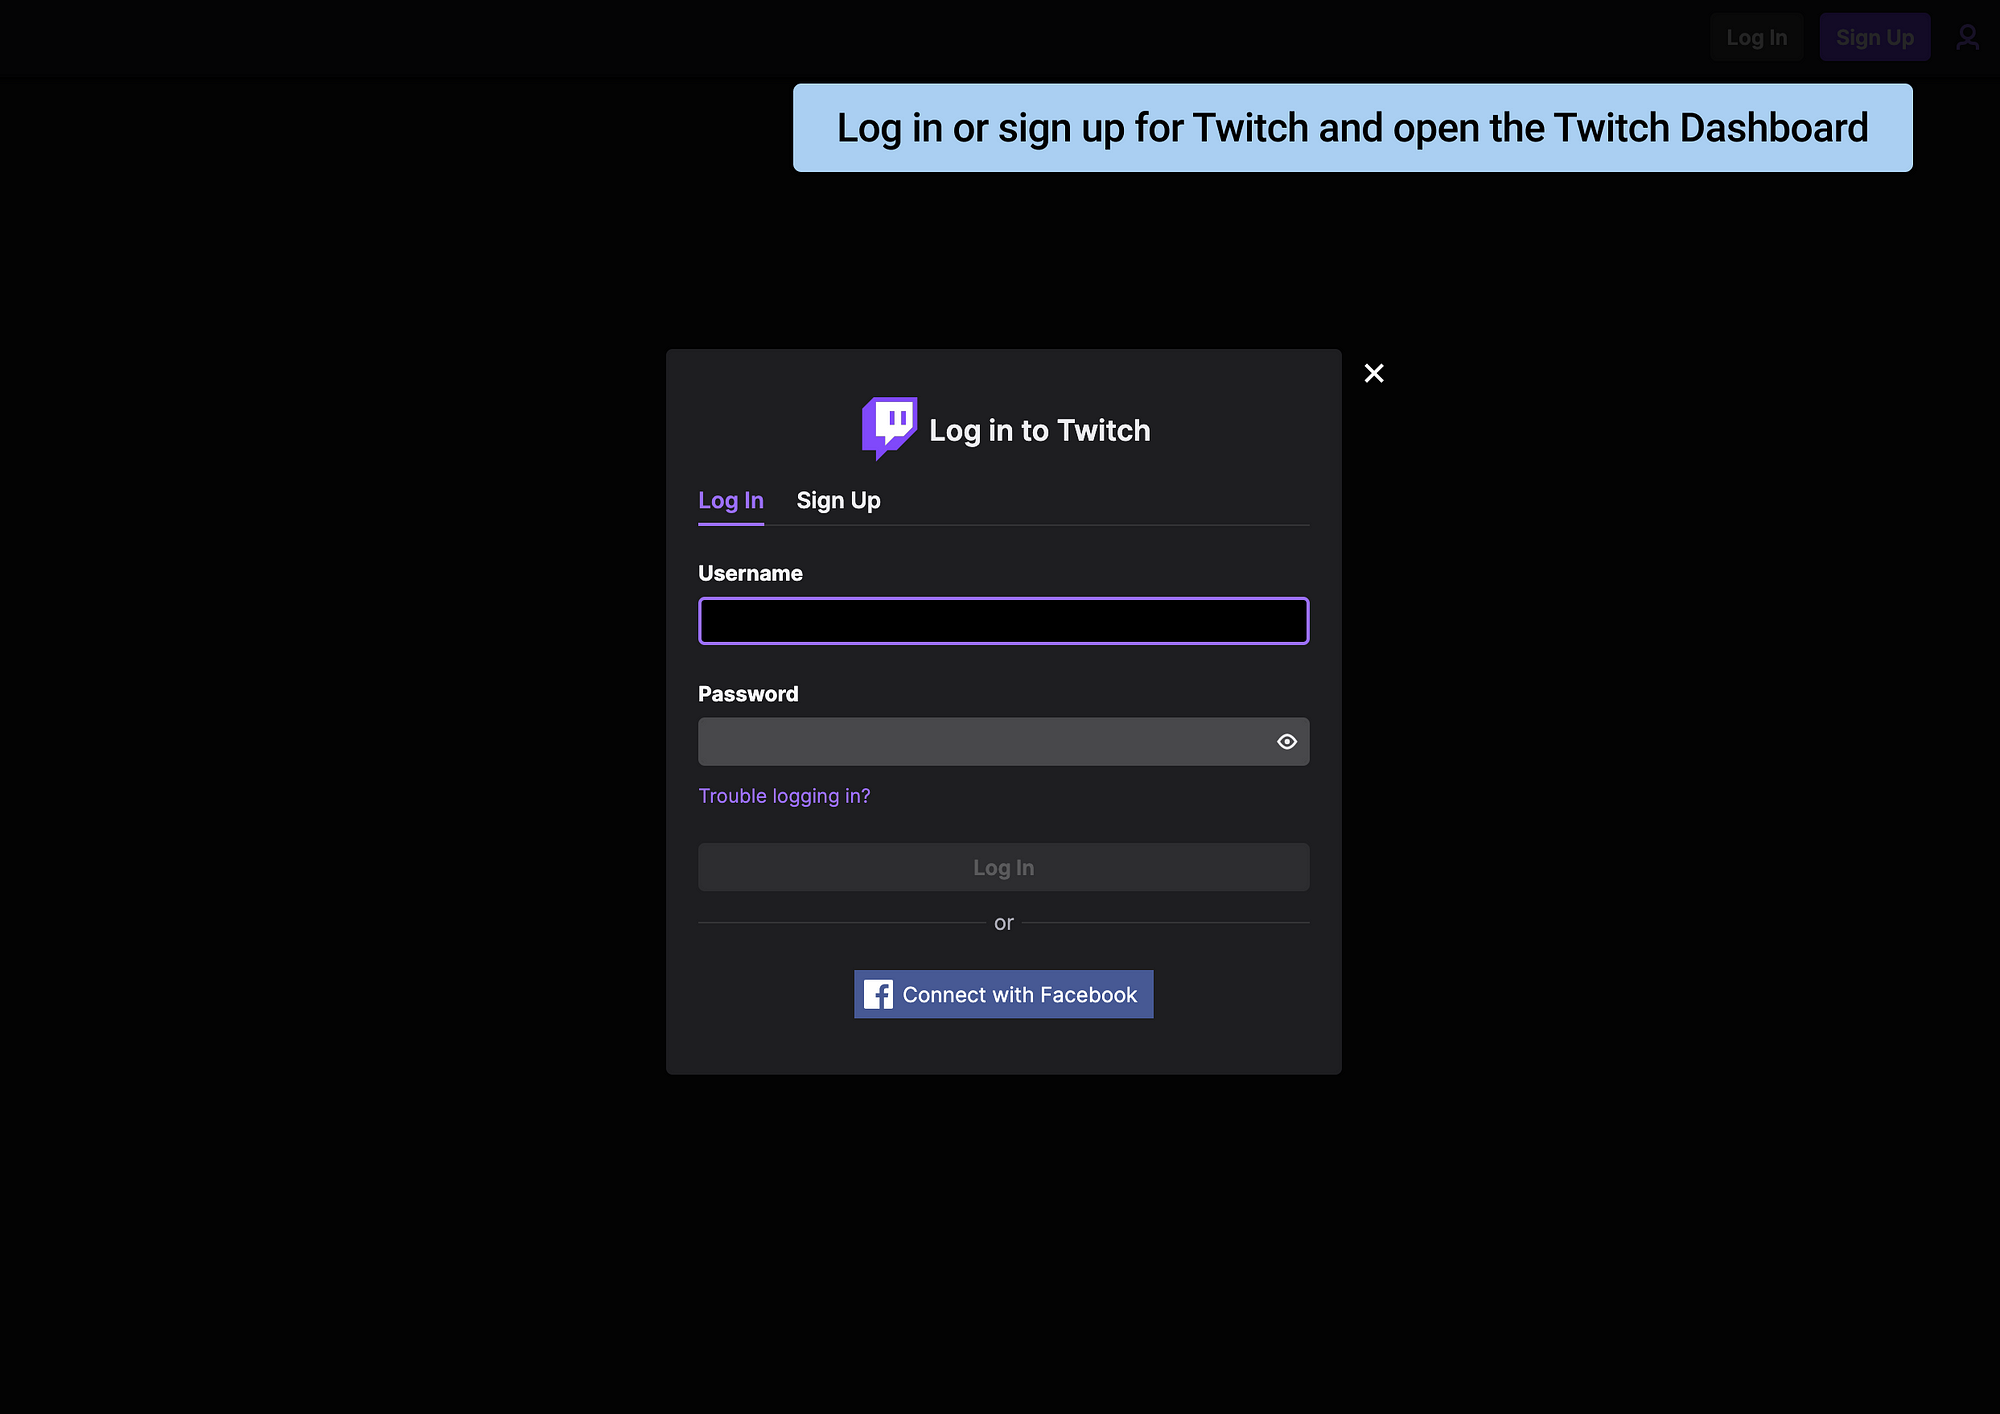 Update: Logins to Twitch with Facebook